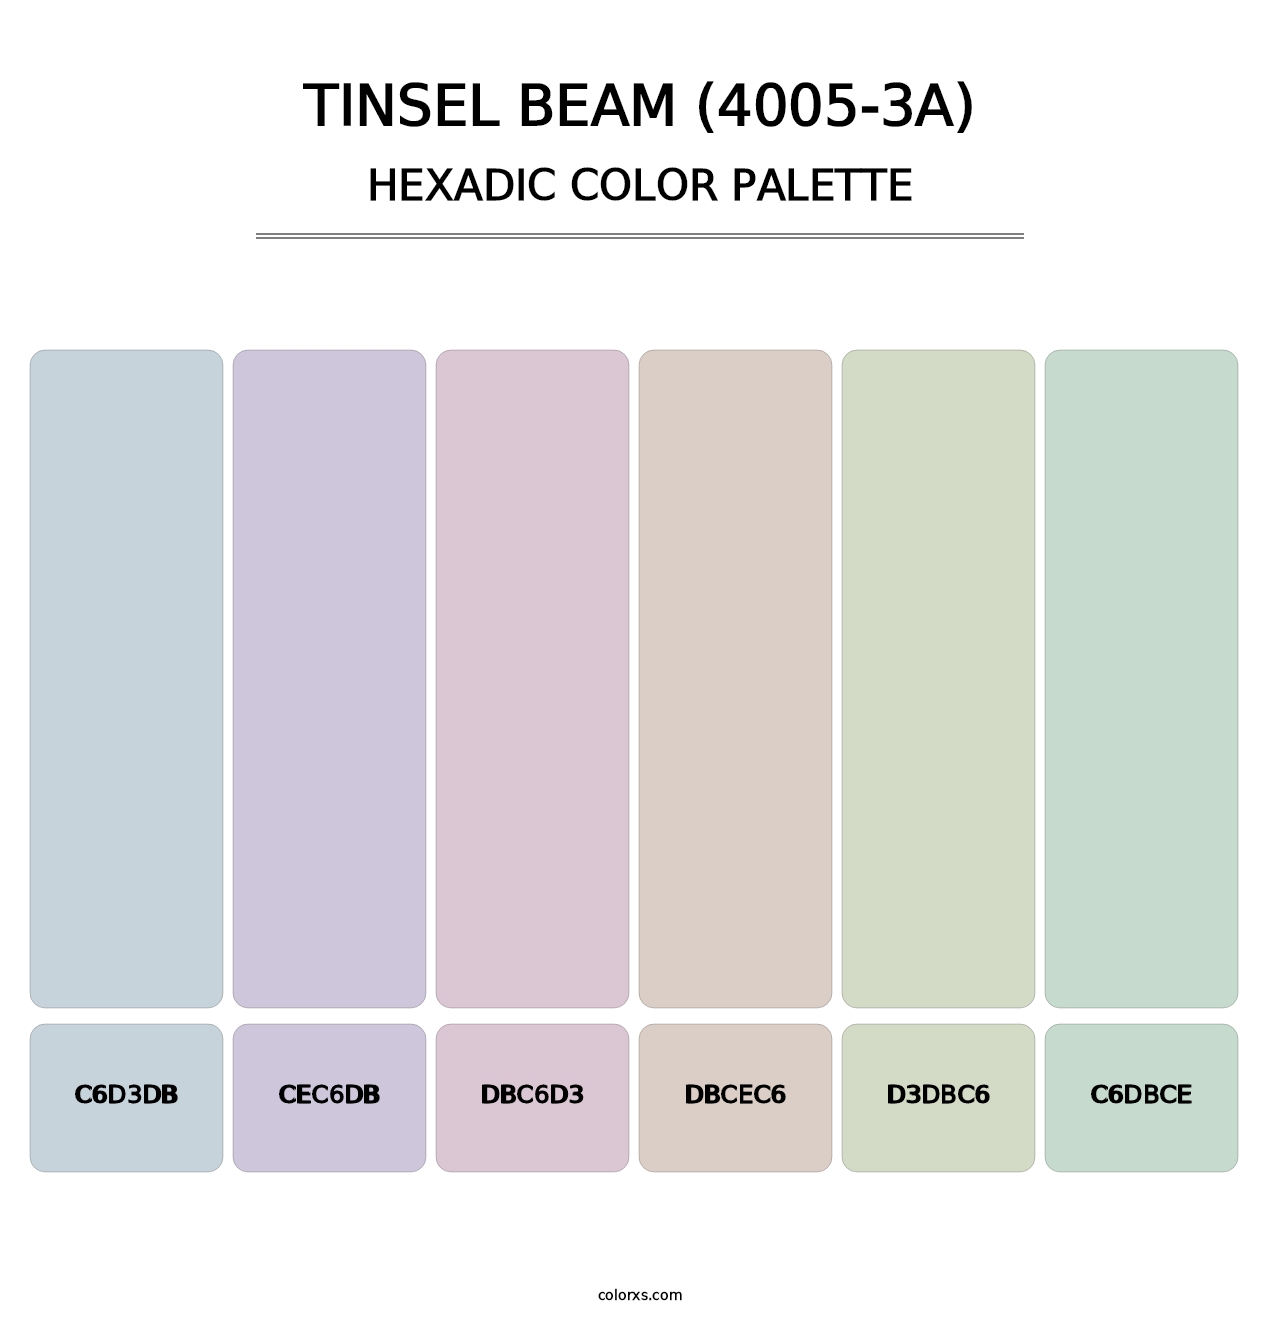 Tinsel Beam (4005-3A) - Hexadic Color Palette